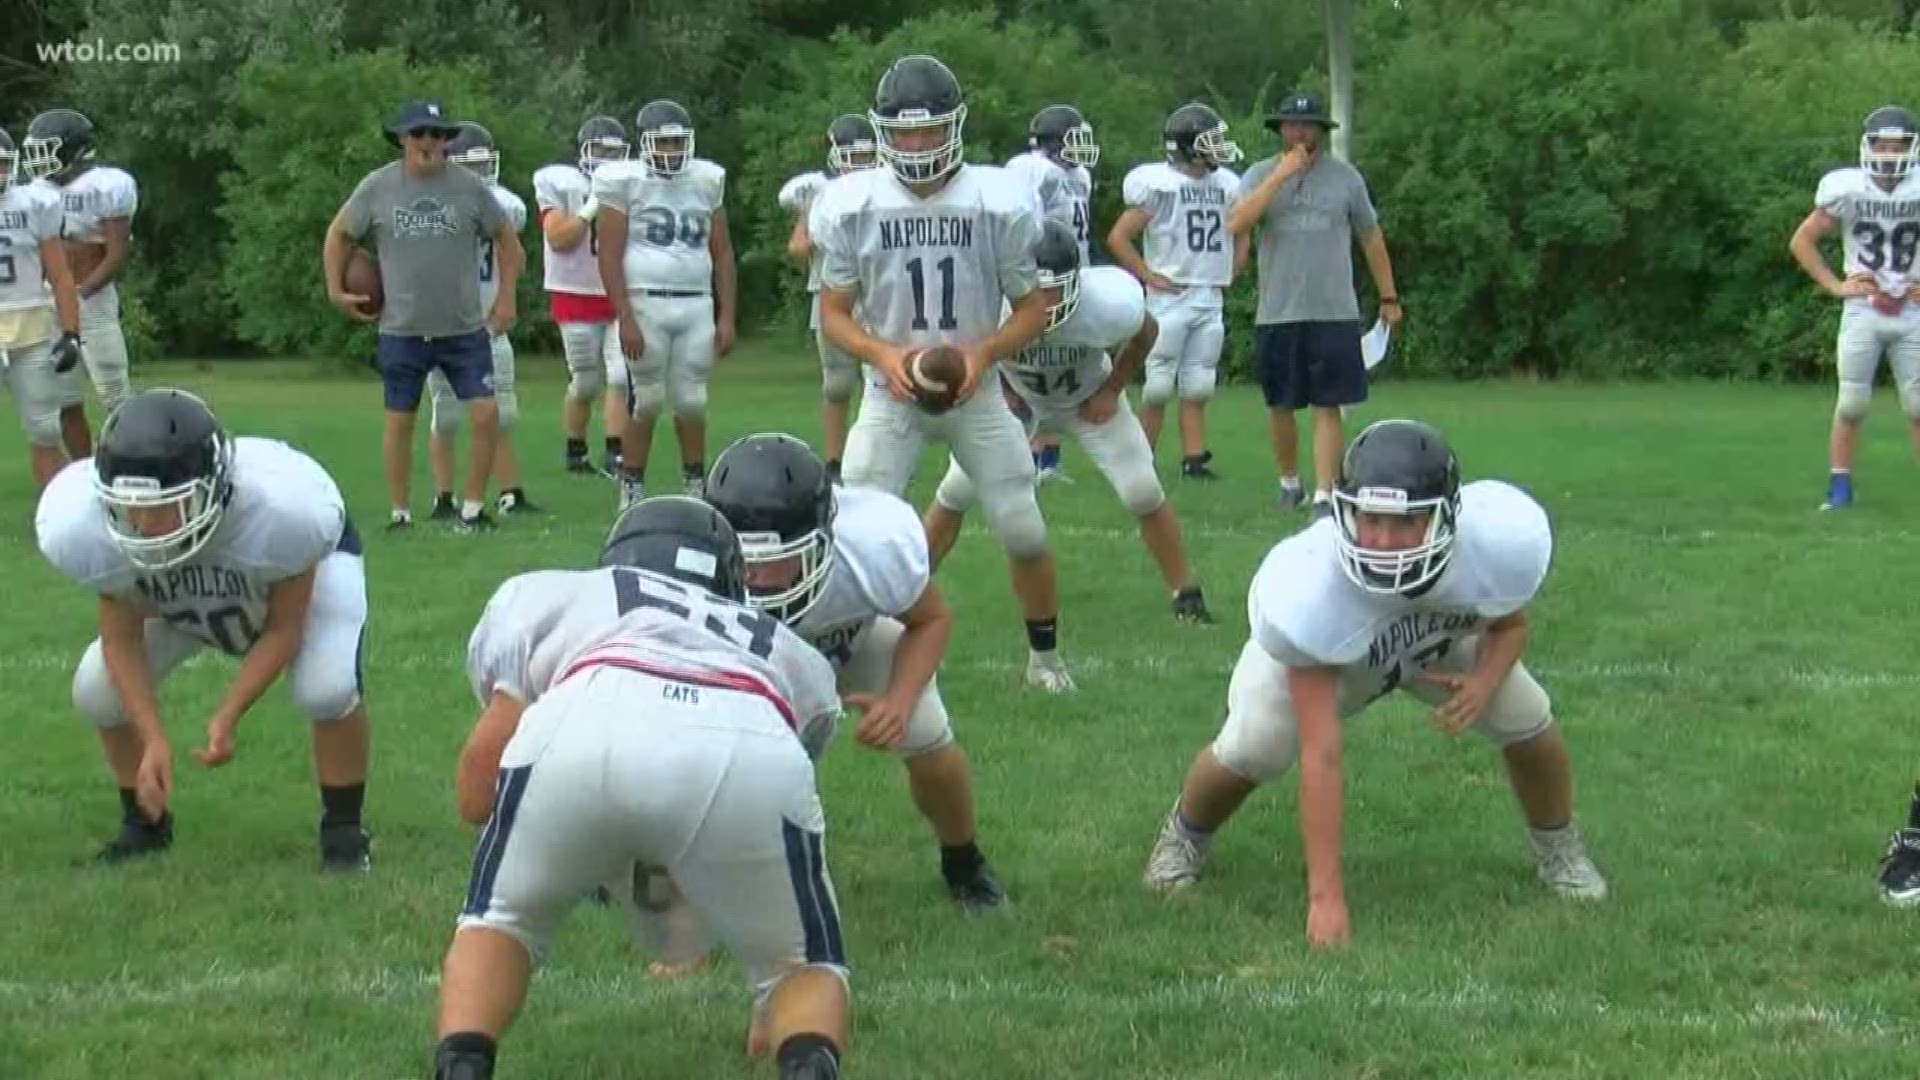 The Wildcats narrowly missed the playoffs last year, but returning QB and RB bring 2 key pieces to the gridiron this season. With the right pieces in place, Napoleon looks to make this year the return to post-season action.